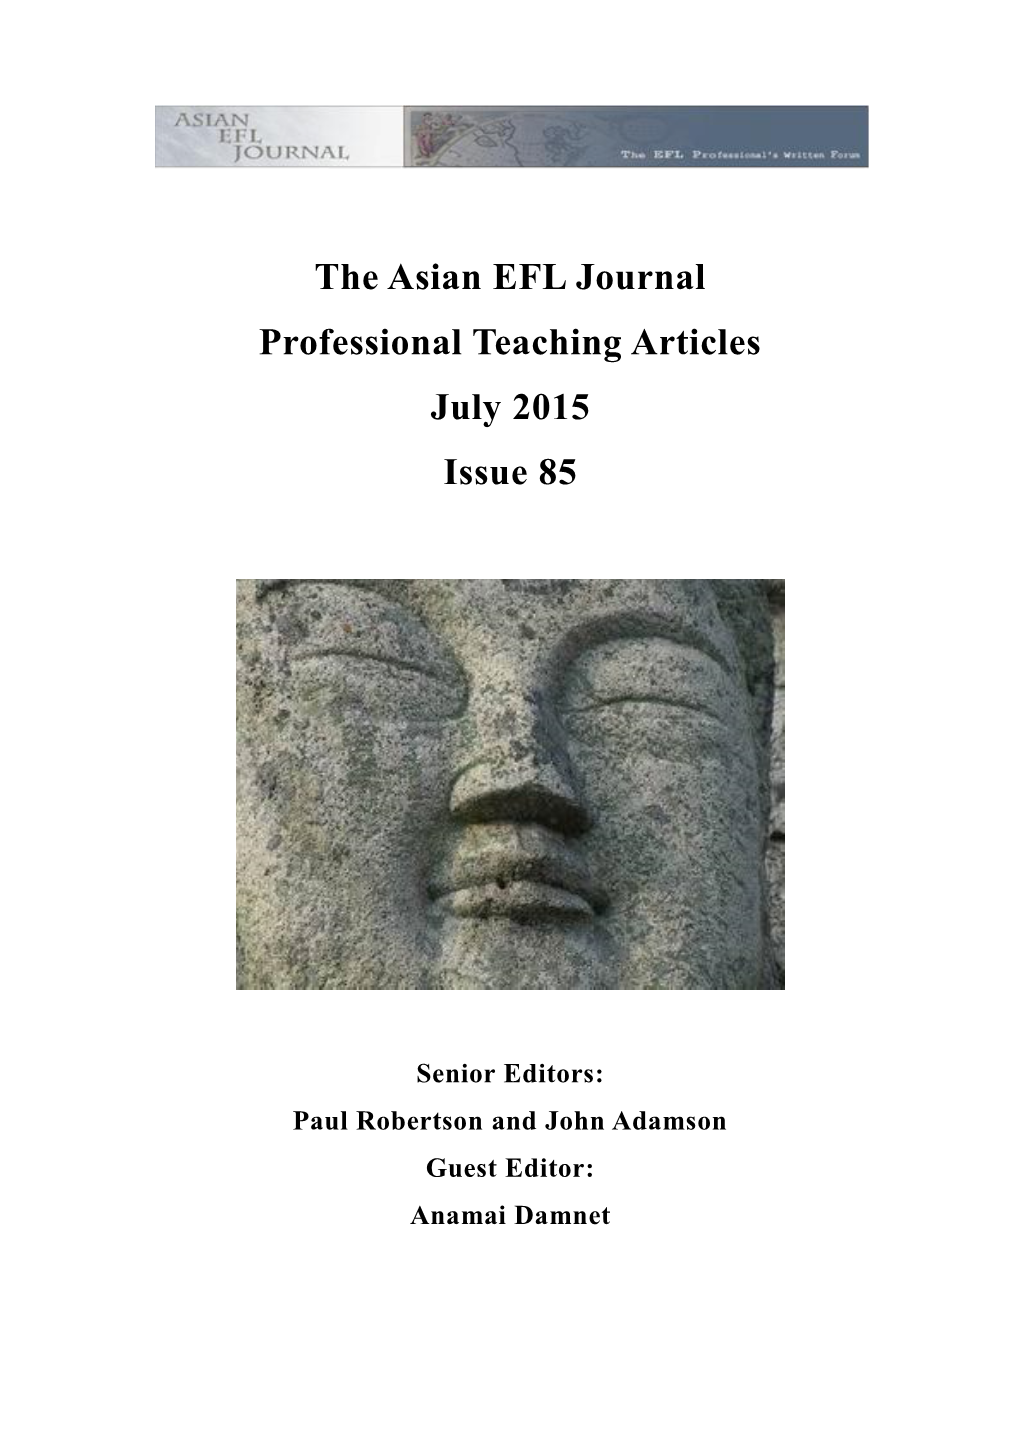 The Asian EFL Journal Professional Teaching Articles July 2015 Issue 85